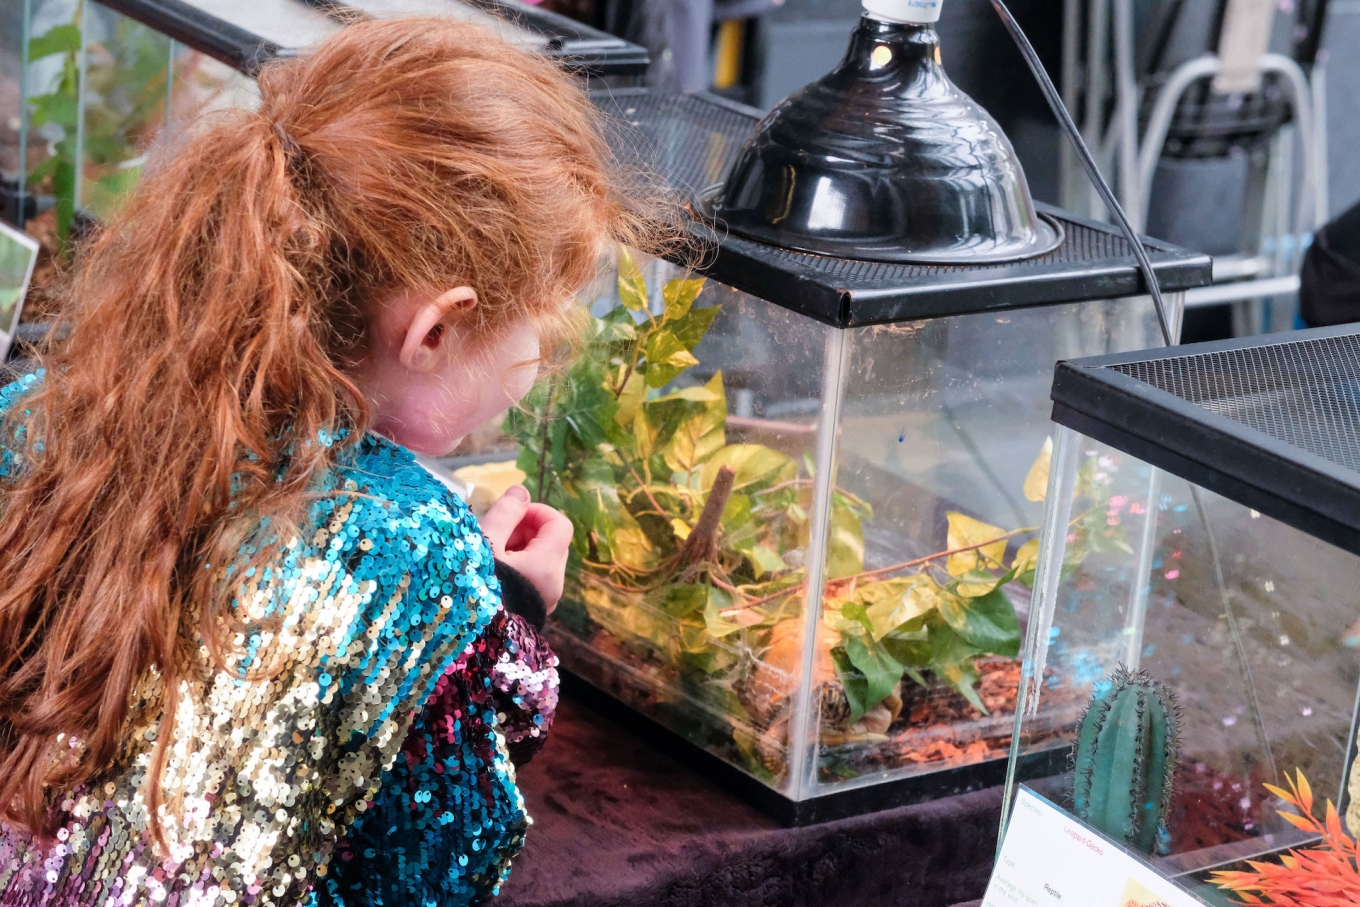 Fascinated young girl gets up close to peer into terrarium